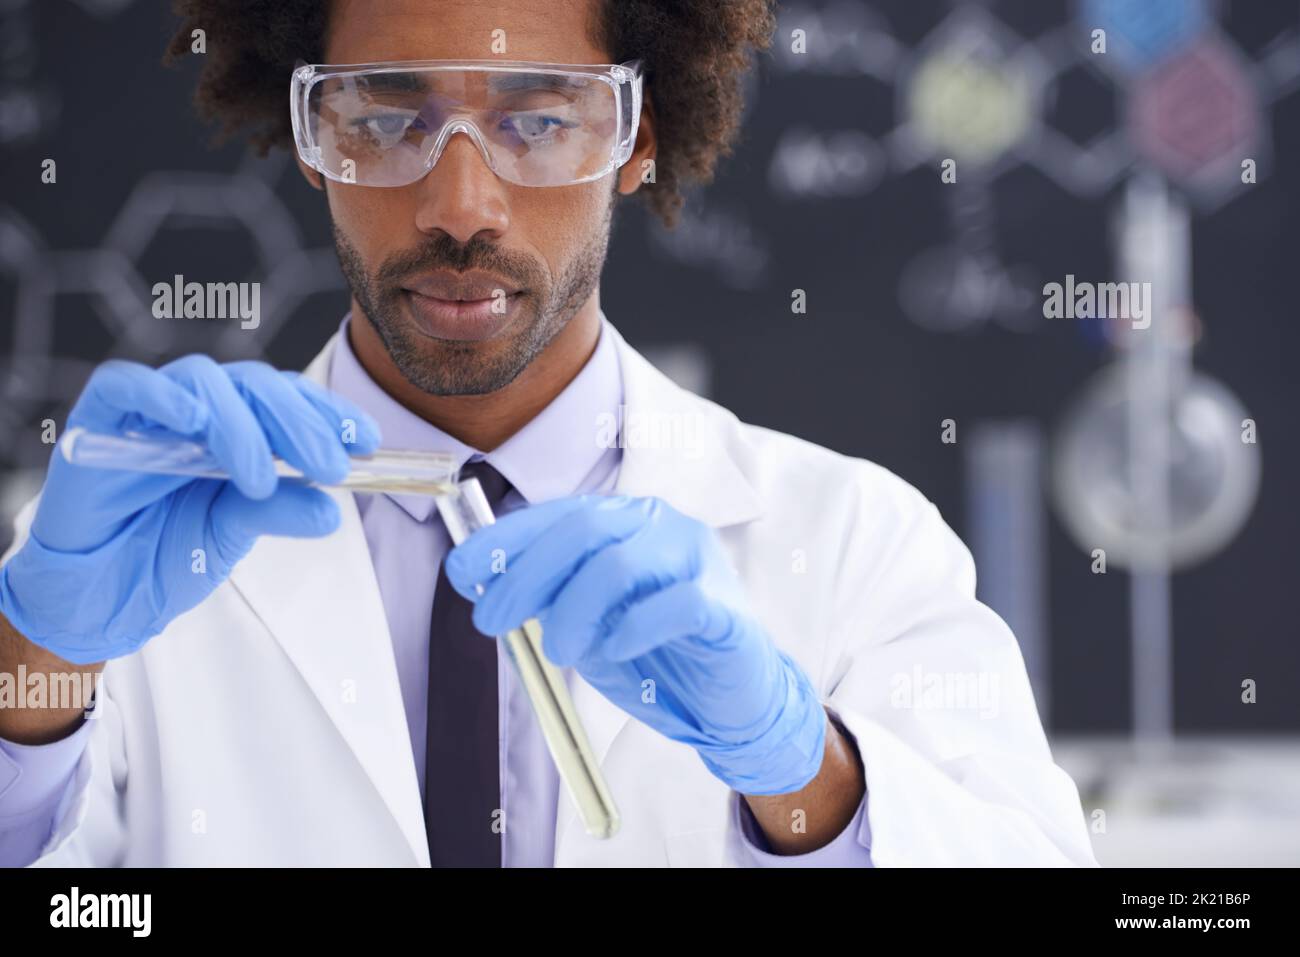 Experiments in progress. a male scientist conducting an experiment in his lab. Stock Photo